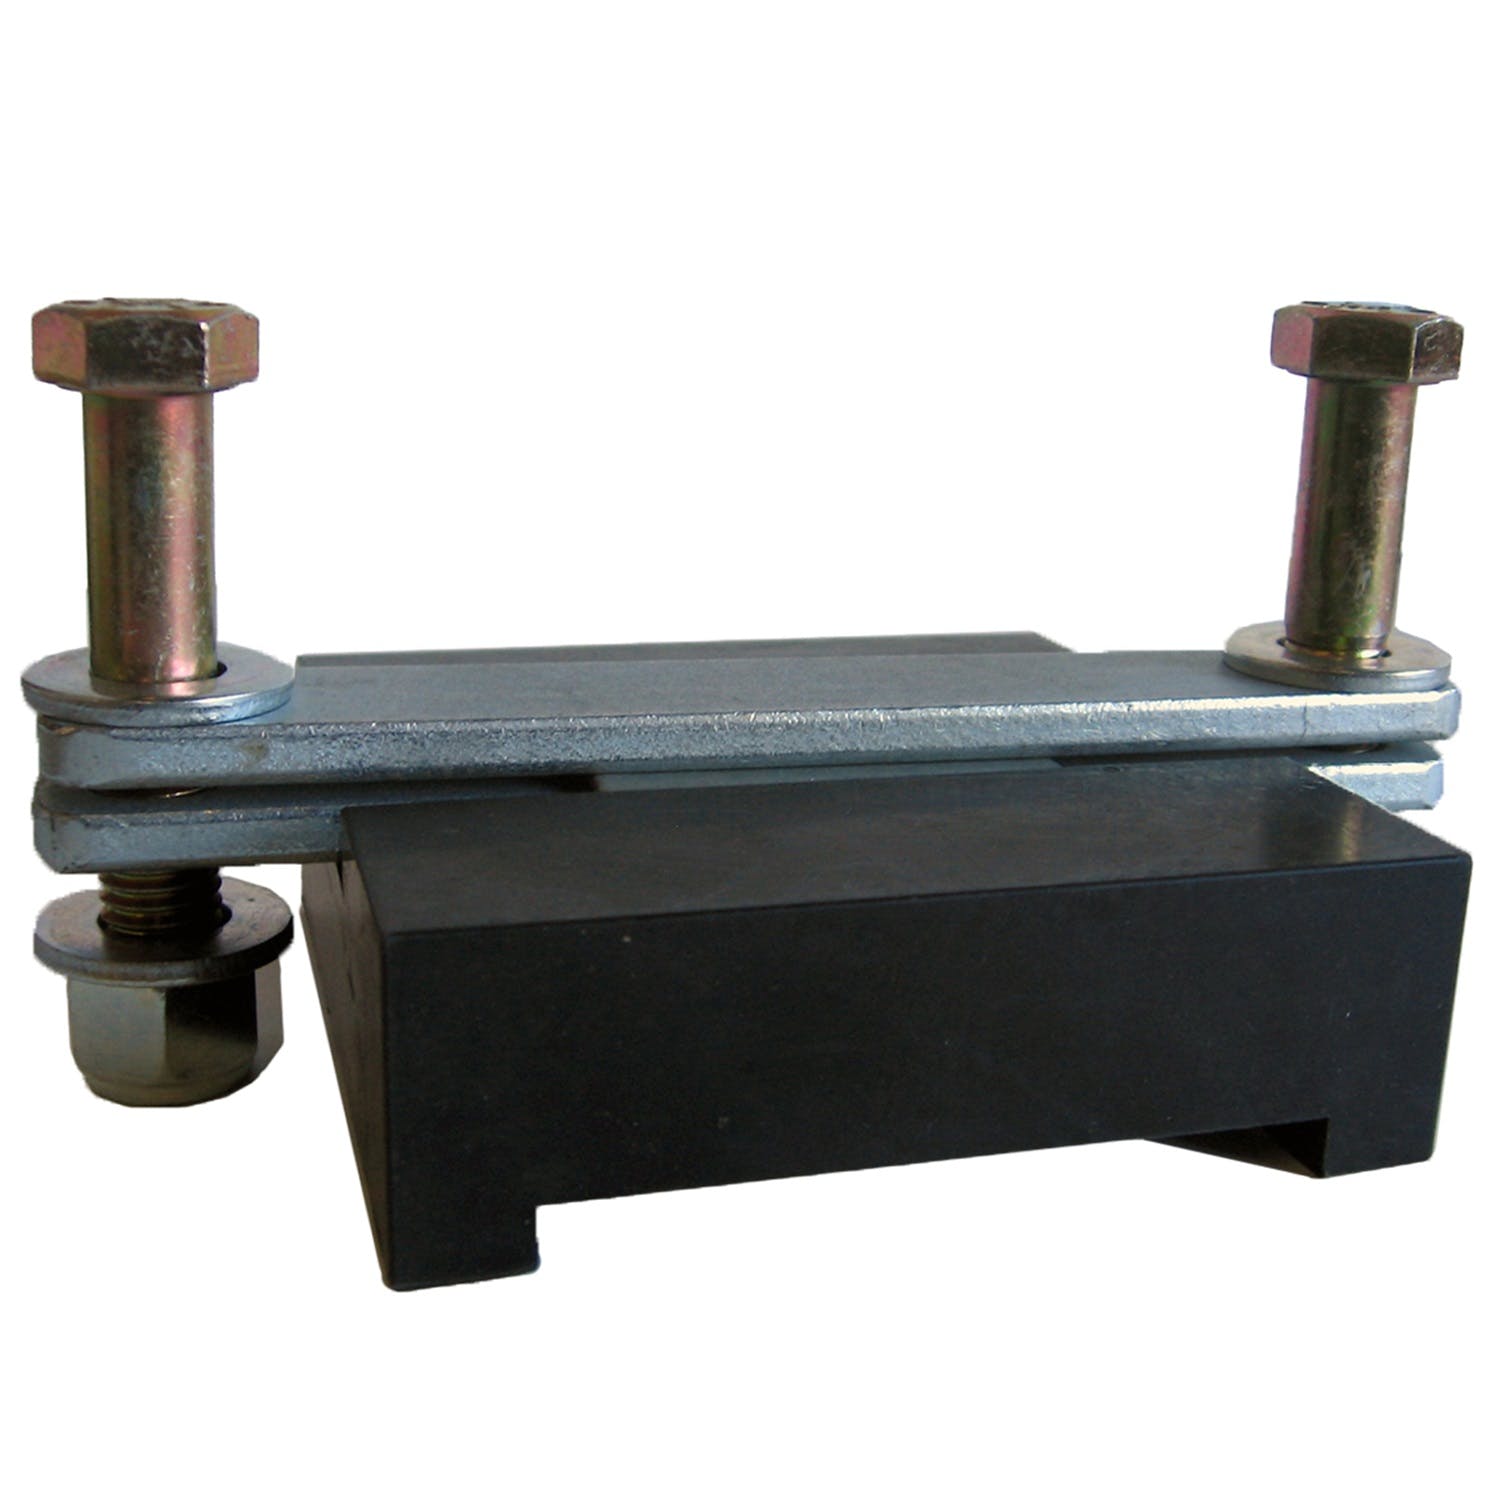 SuperSprings P5KT Mounting Kit used for specified SuperSprings applications